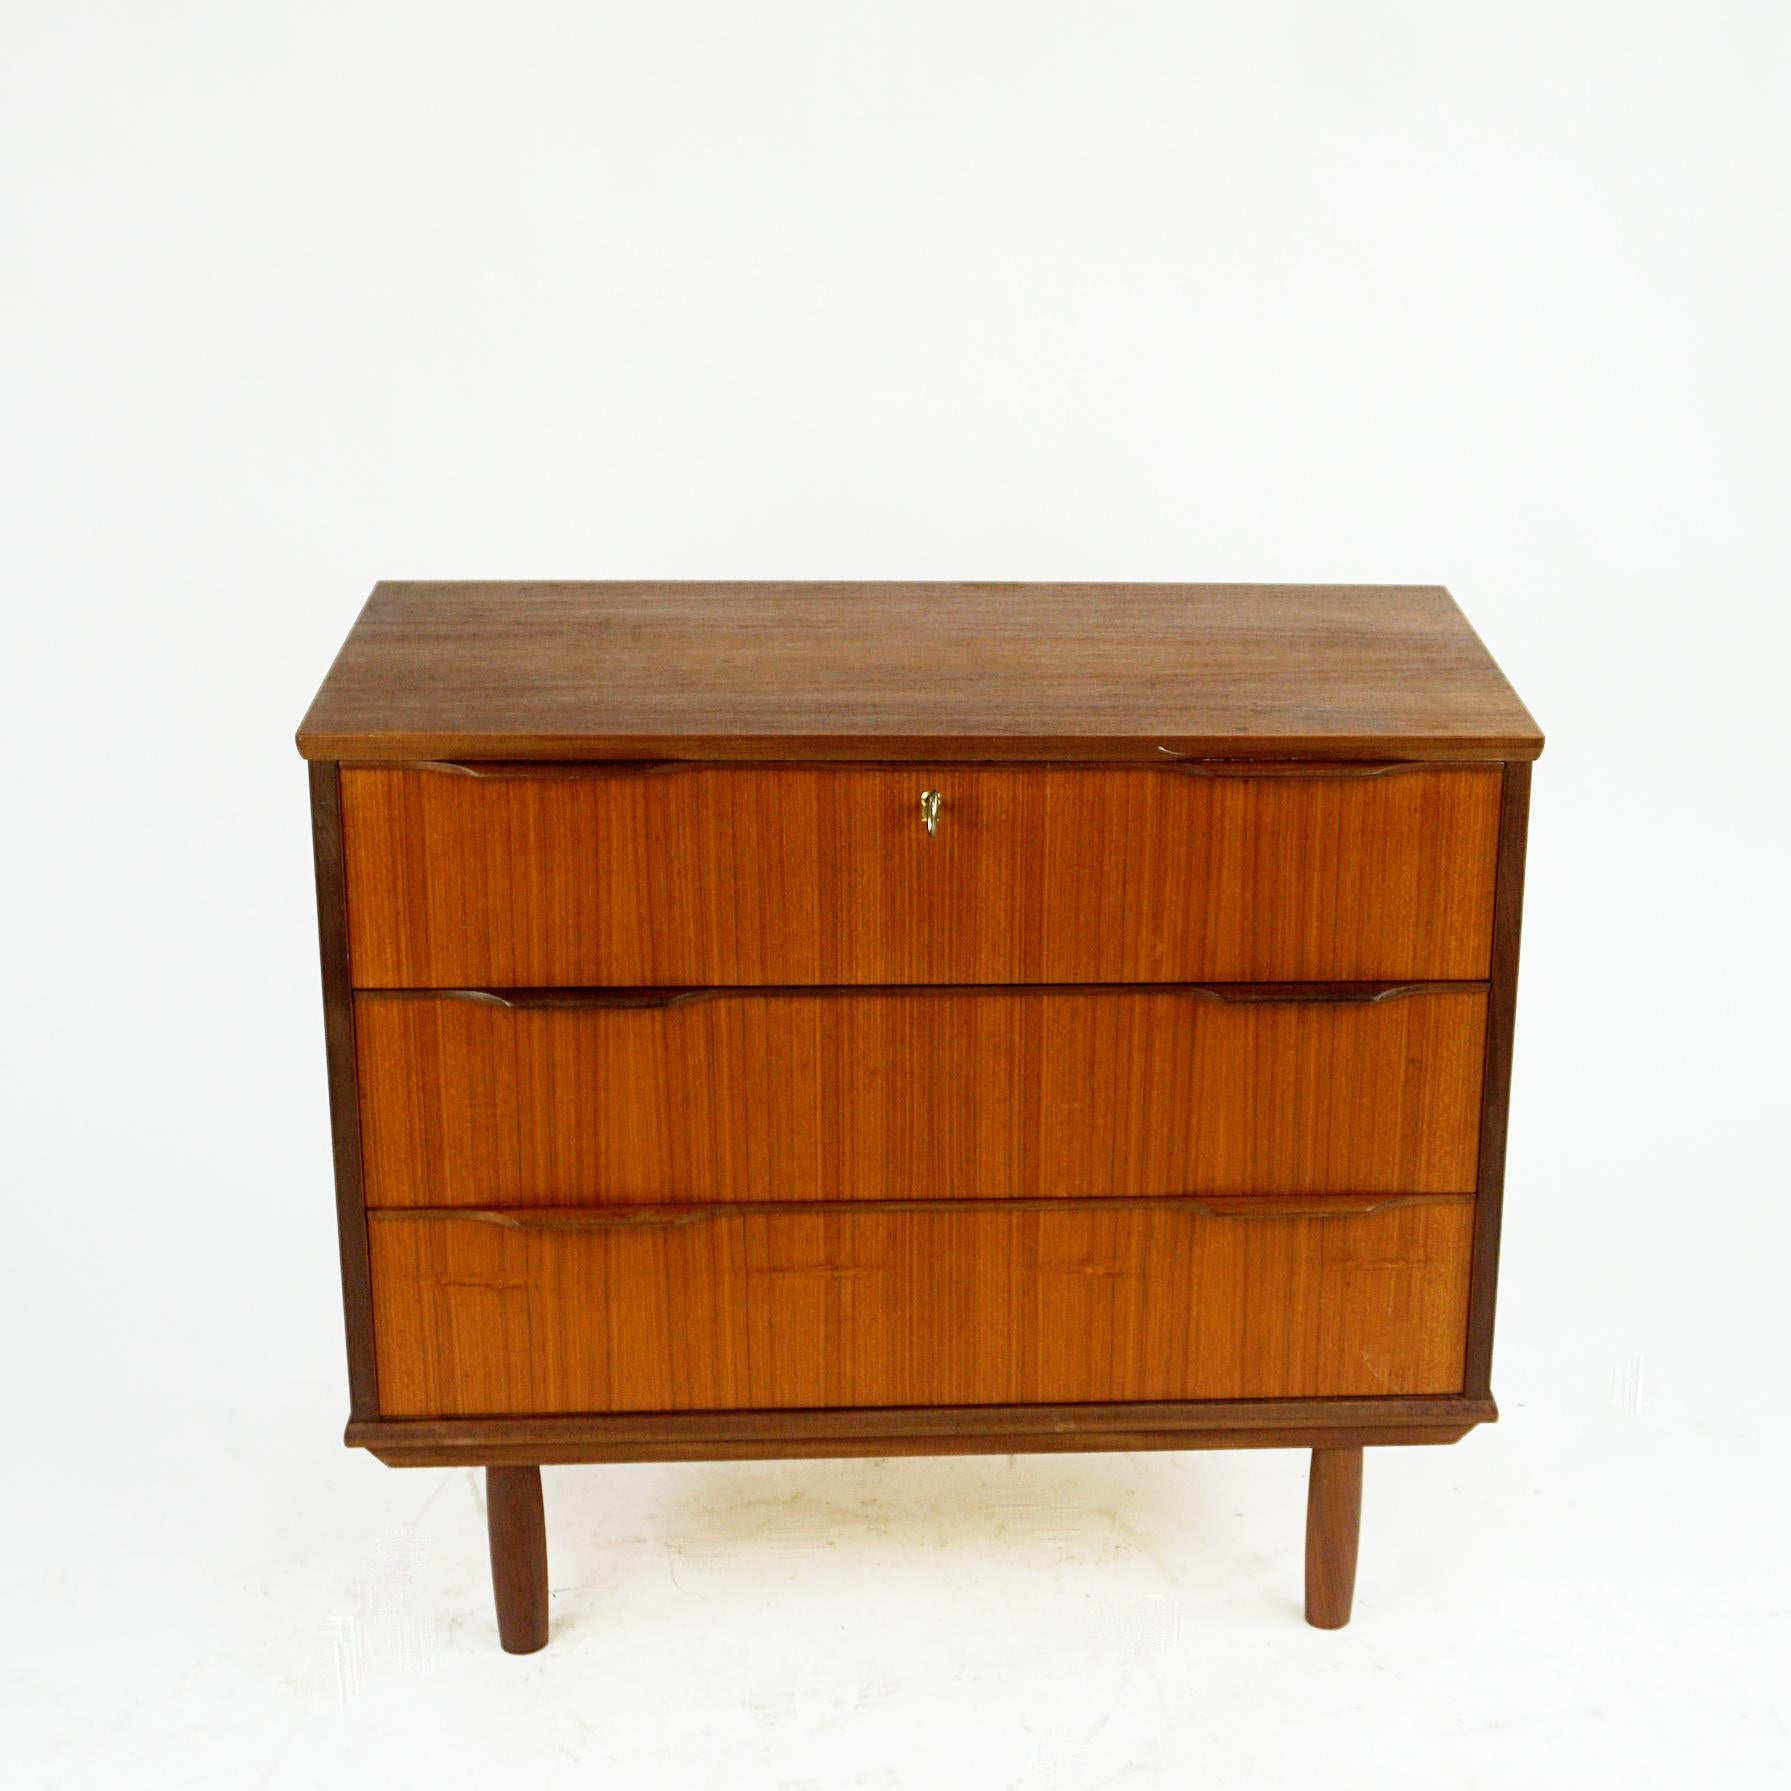 Scandinavian modern teak chest of three drawers manufactured in the 1960s in Denmark. Authentic example for Danish modern design from this period. 
A functional design where all the prominence falls on the expressive natural grain of the wood and